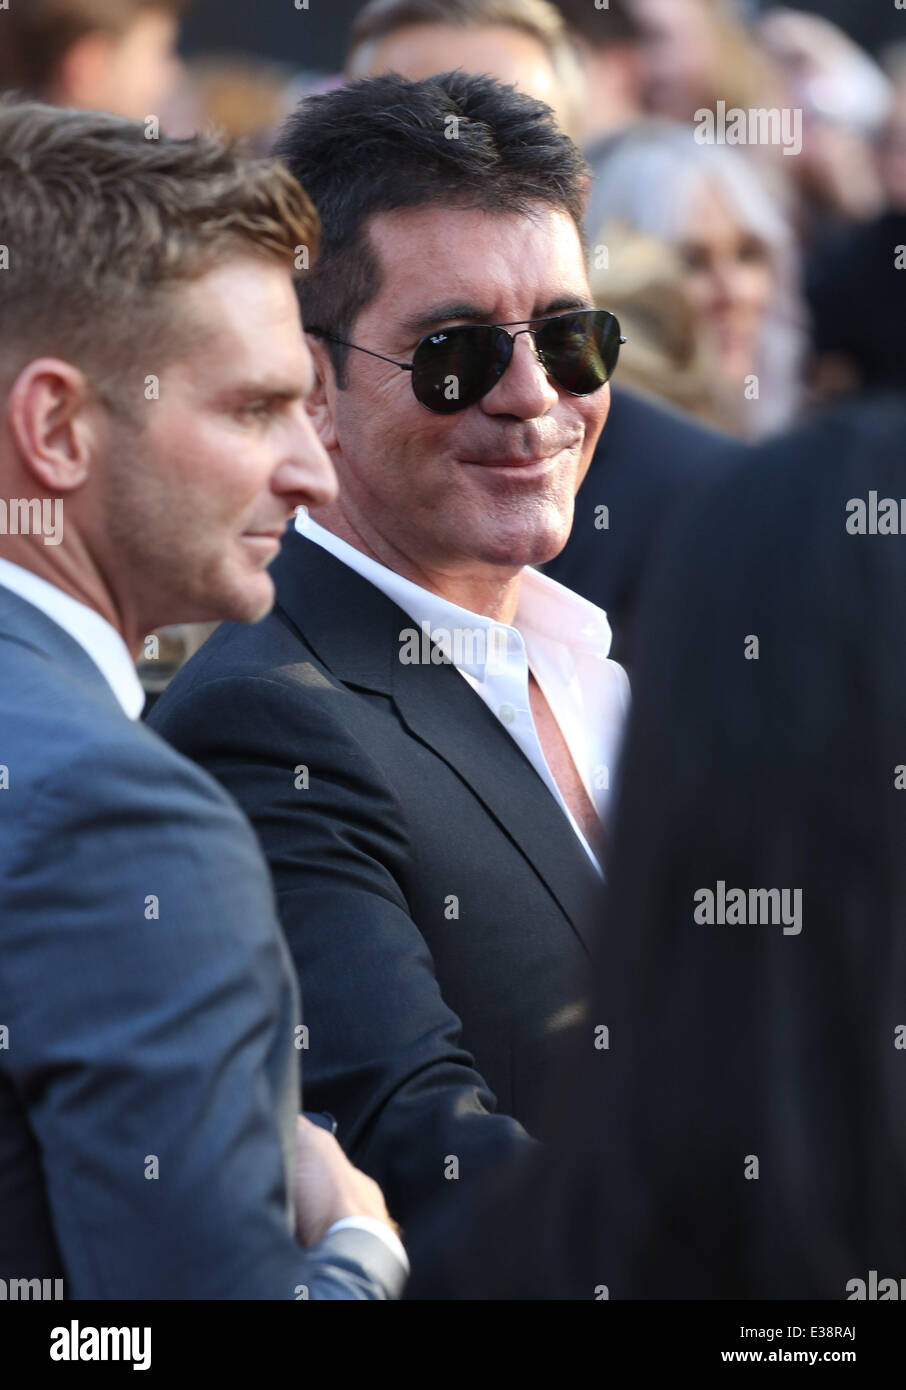 World premiere of 'One Direction: This Is Us' - Arrivals  Featuring: Simon Cowell Where: London, United Kingdom When: 20 Aug 2013 Stock Photo